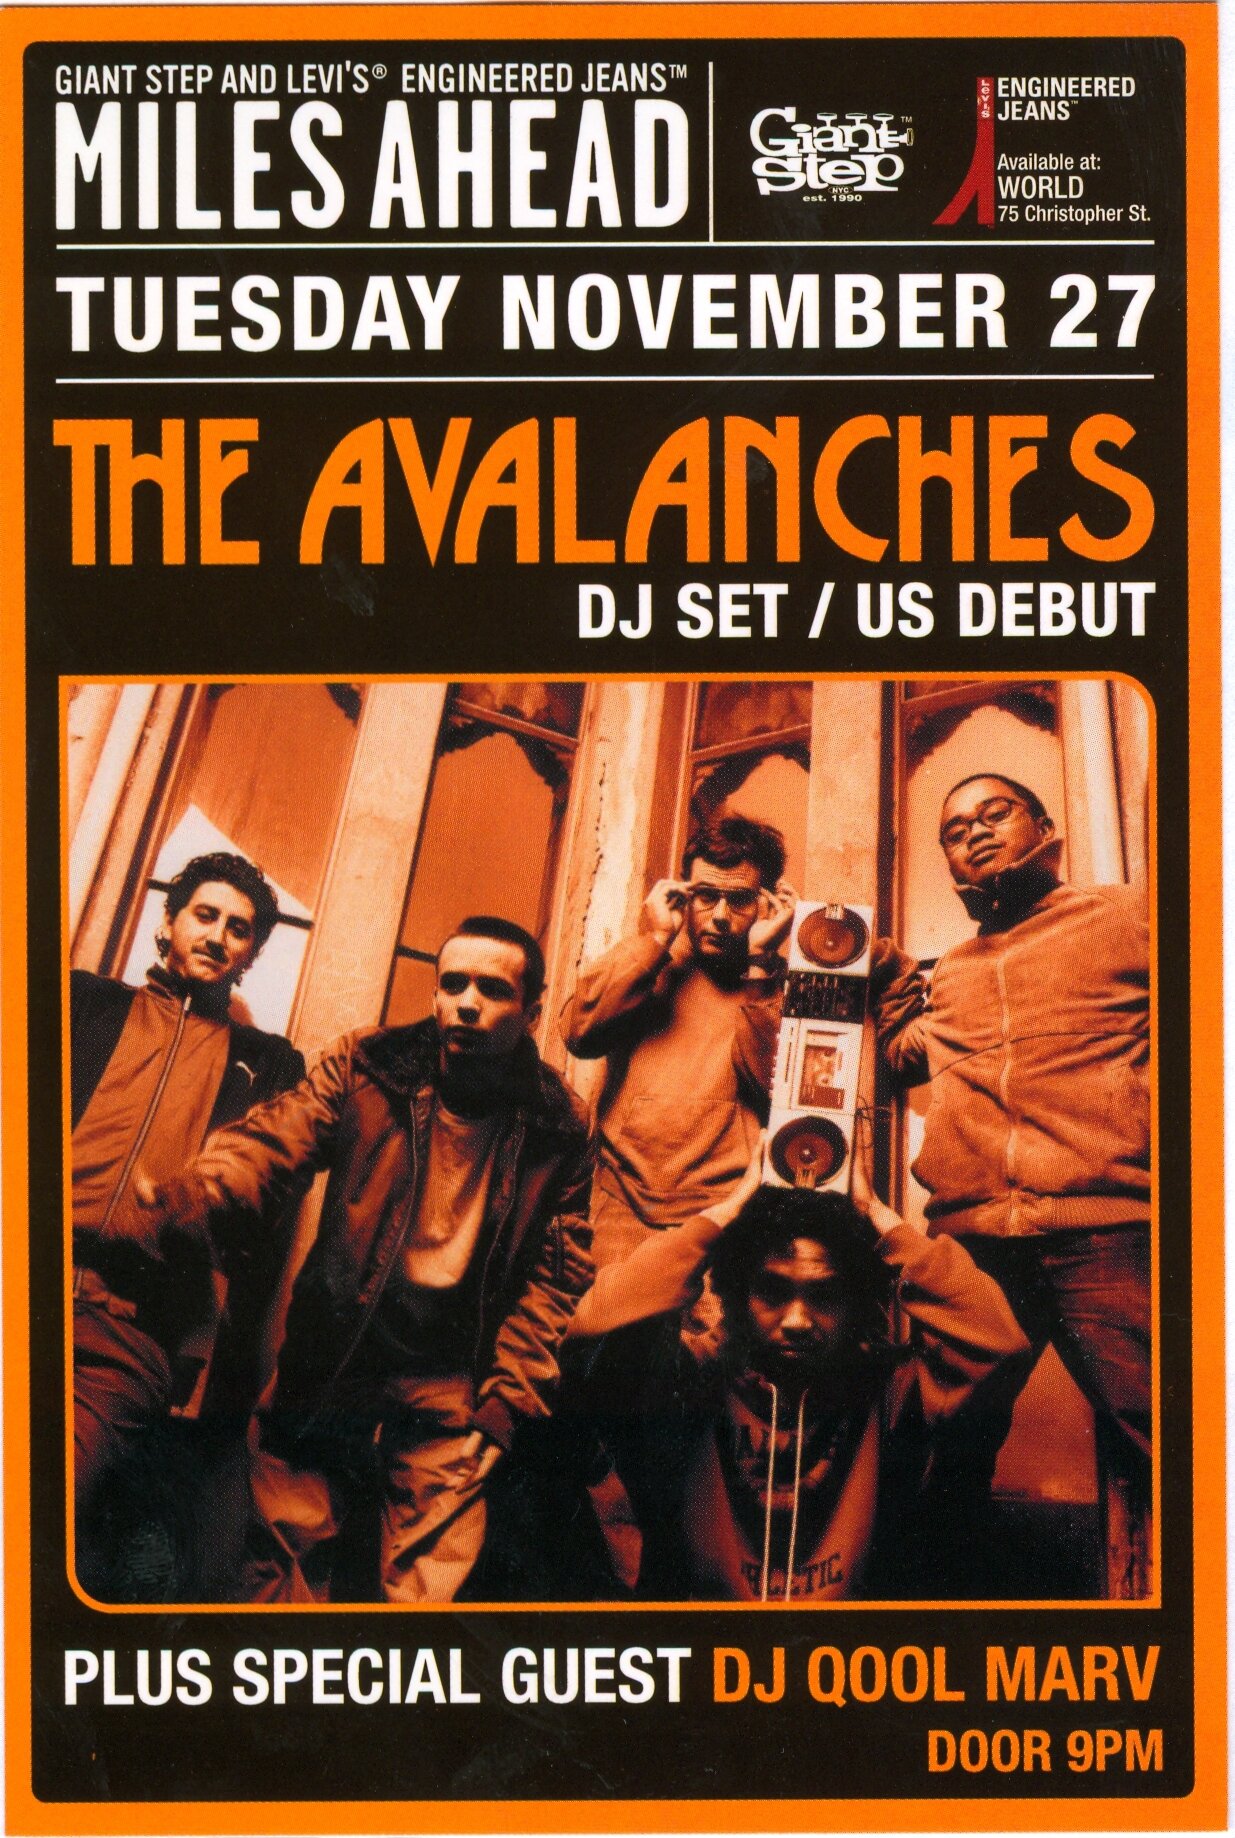 11-27-01 The Avalanches.jpg